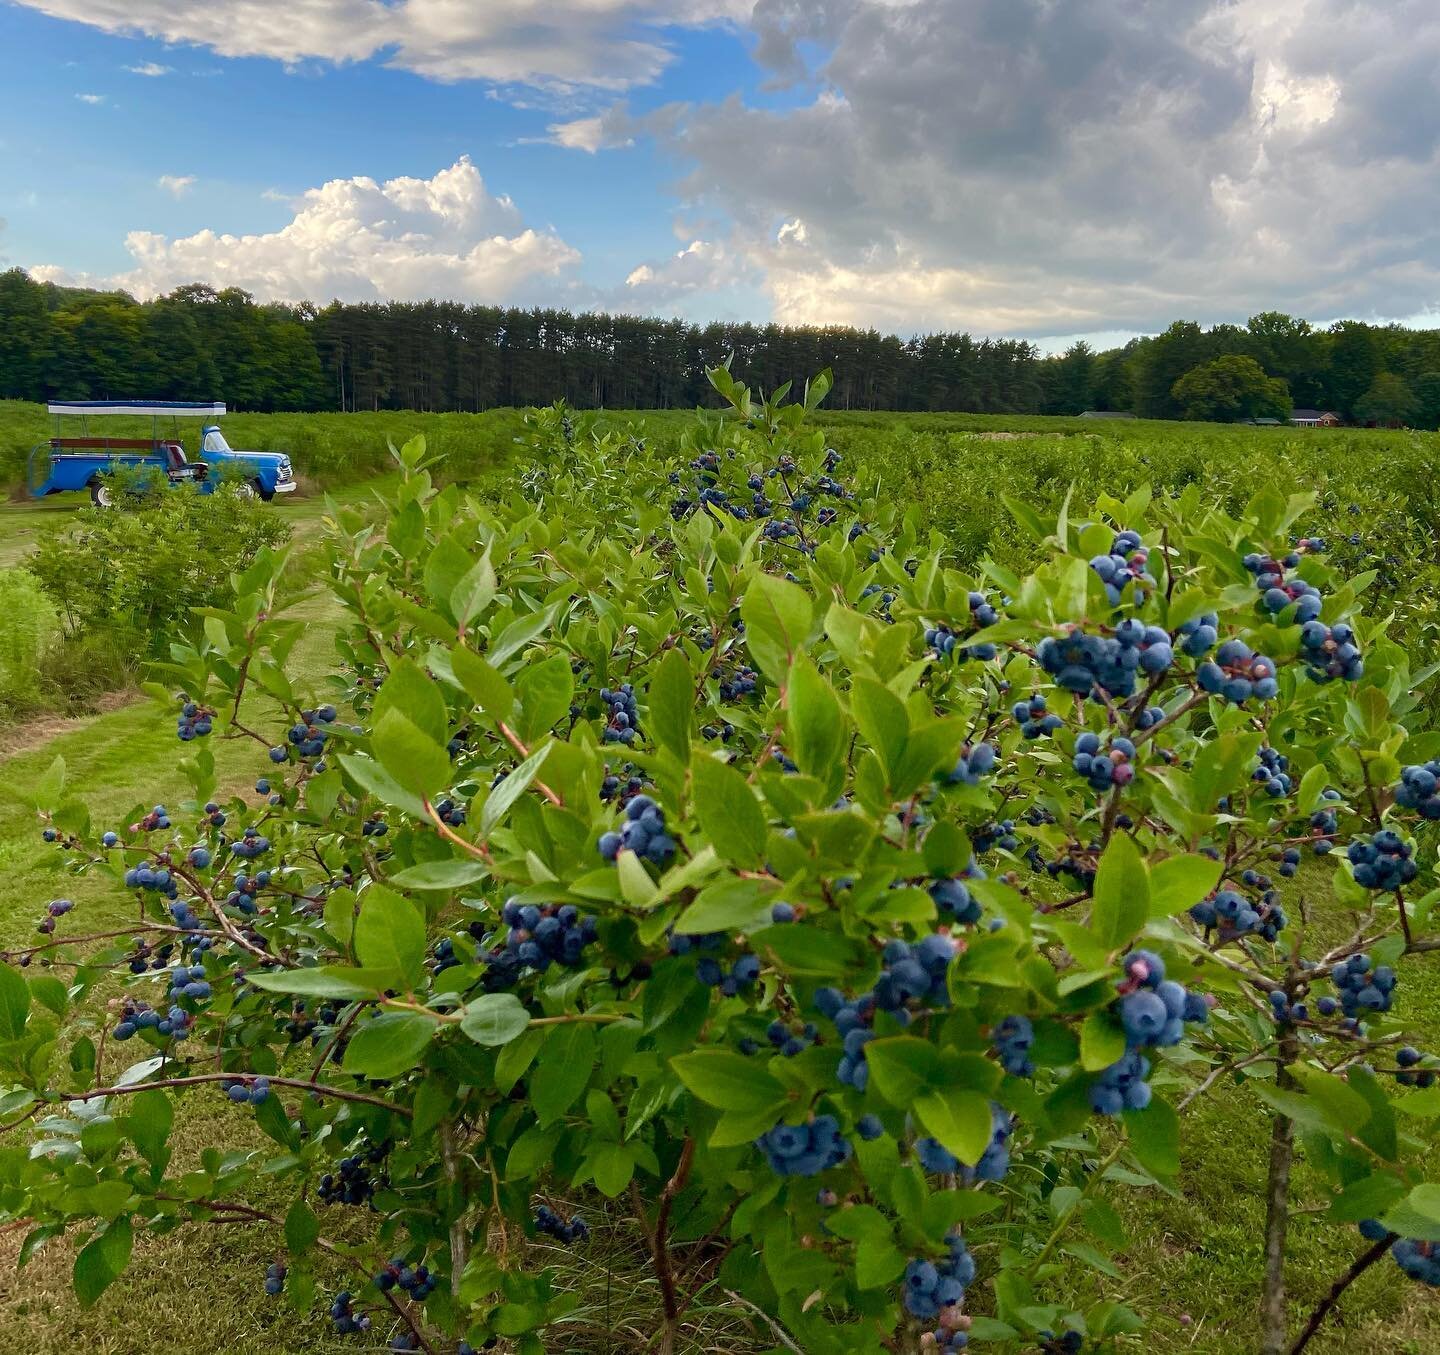 Expecting to finish up first picking Coville and Elizabeth today.  Next we have several second picking blueberry varieties, including Herbert&rsquo;s (attention Herbert fans, we know who you are). Remember this is the time in the season to check in b